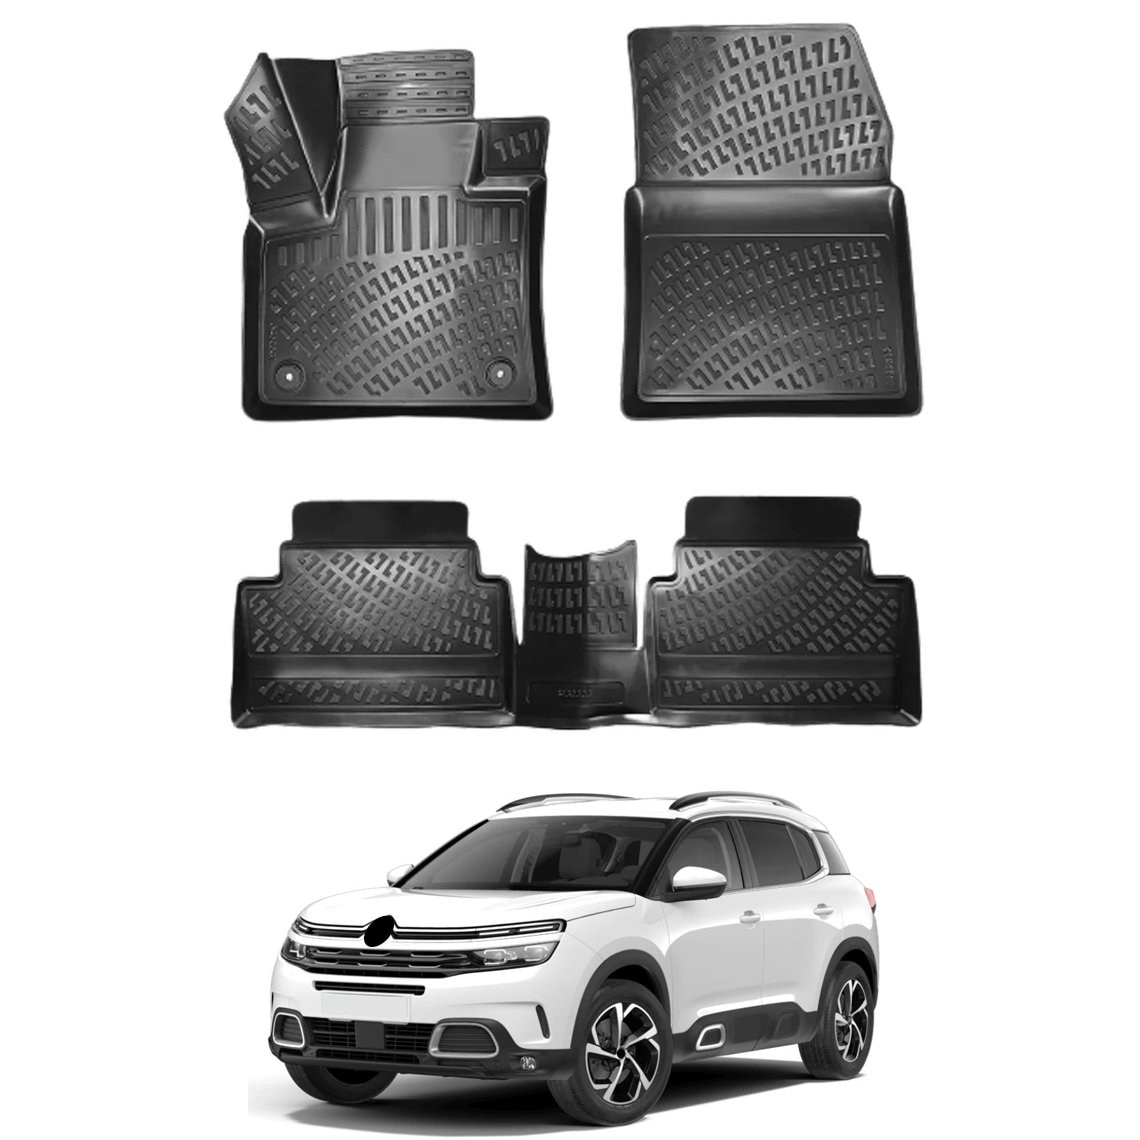 For Citroen C5 aircross 2017 2018 2019 Accessories Car Interior Cup Holder  Panel Bezel Molding Cover Decoration - buy For Citroen C5 aircross 2017  2018 2019 Accessories Car Interior Cup Holder Panel